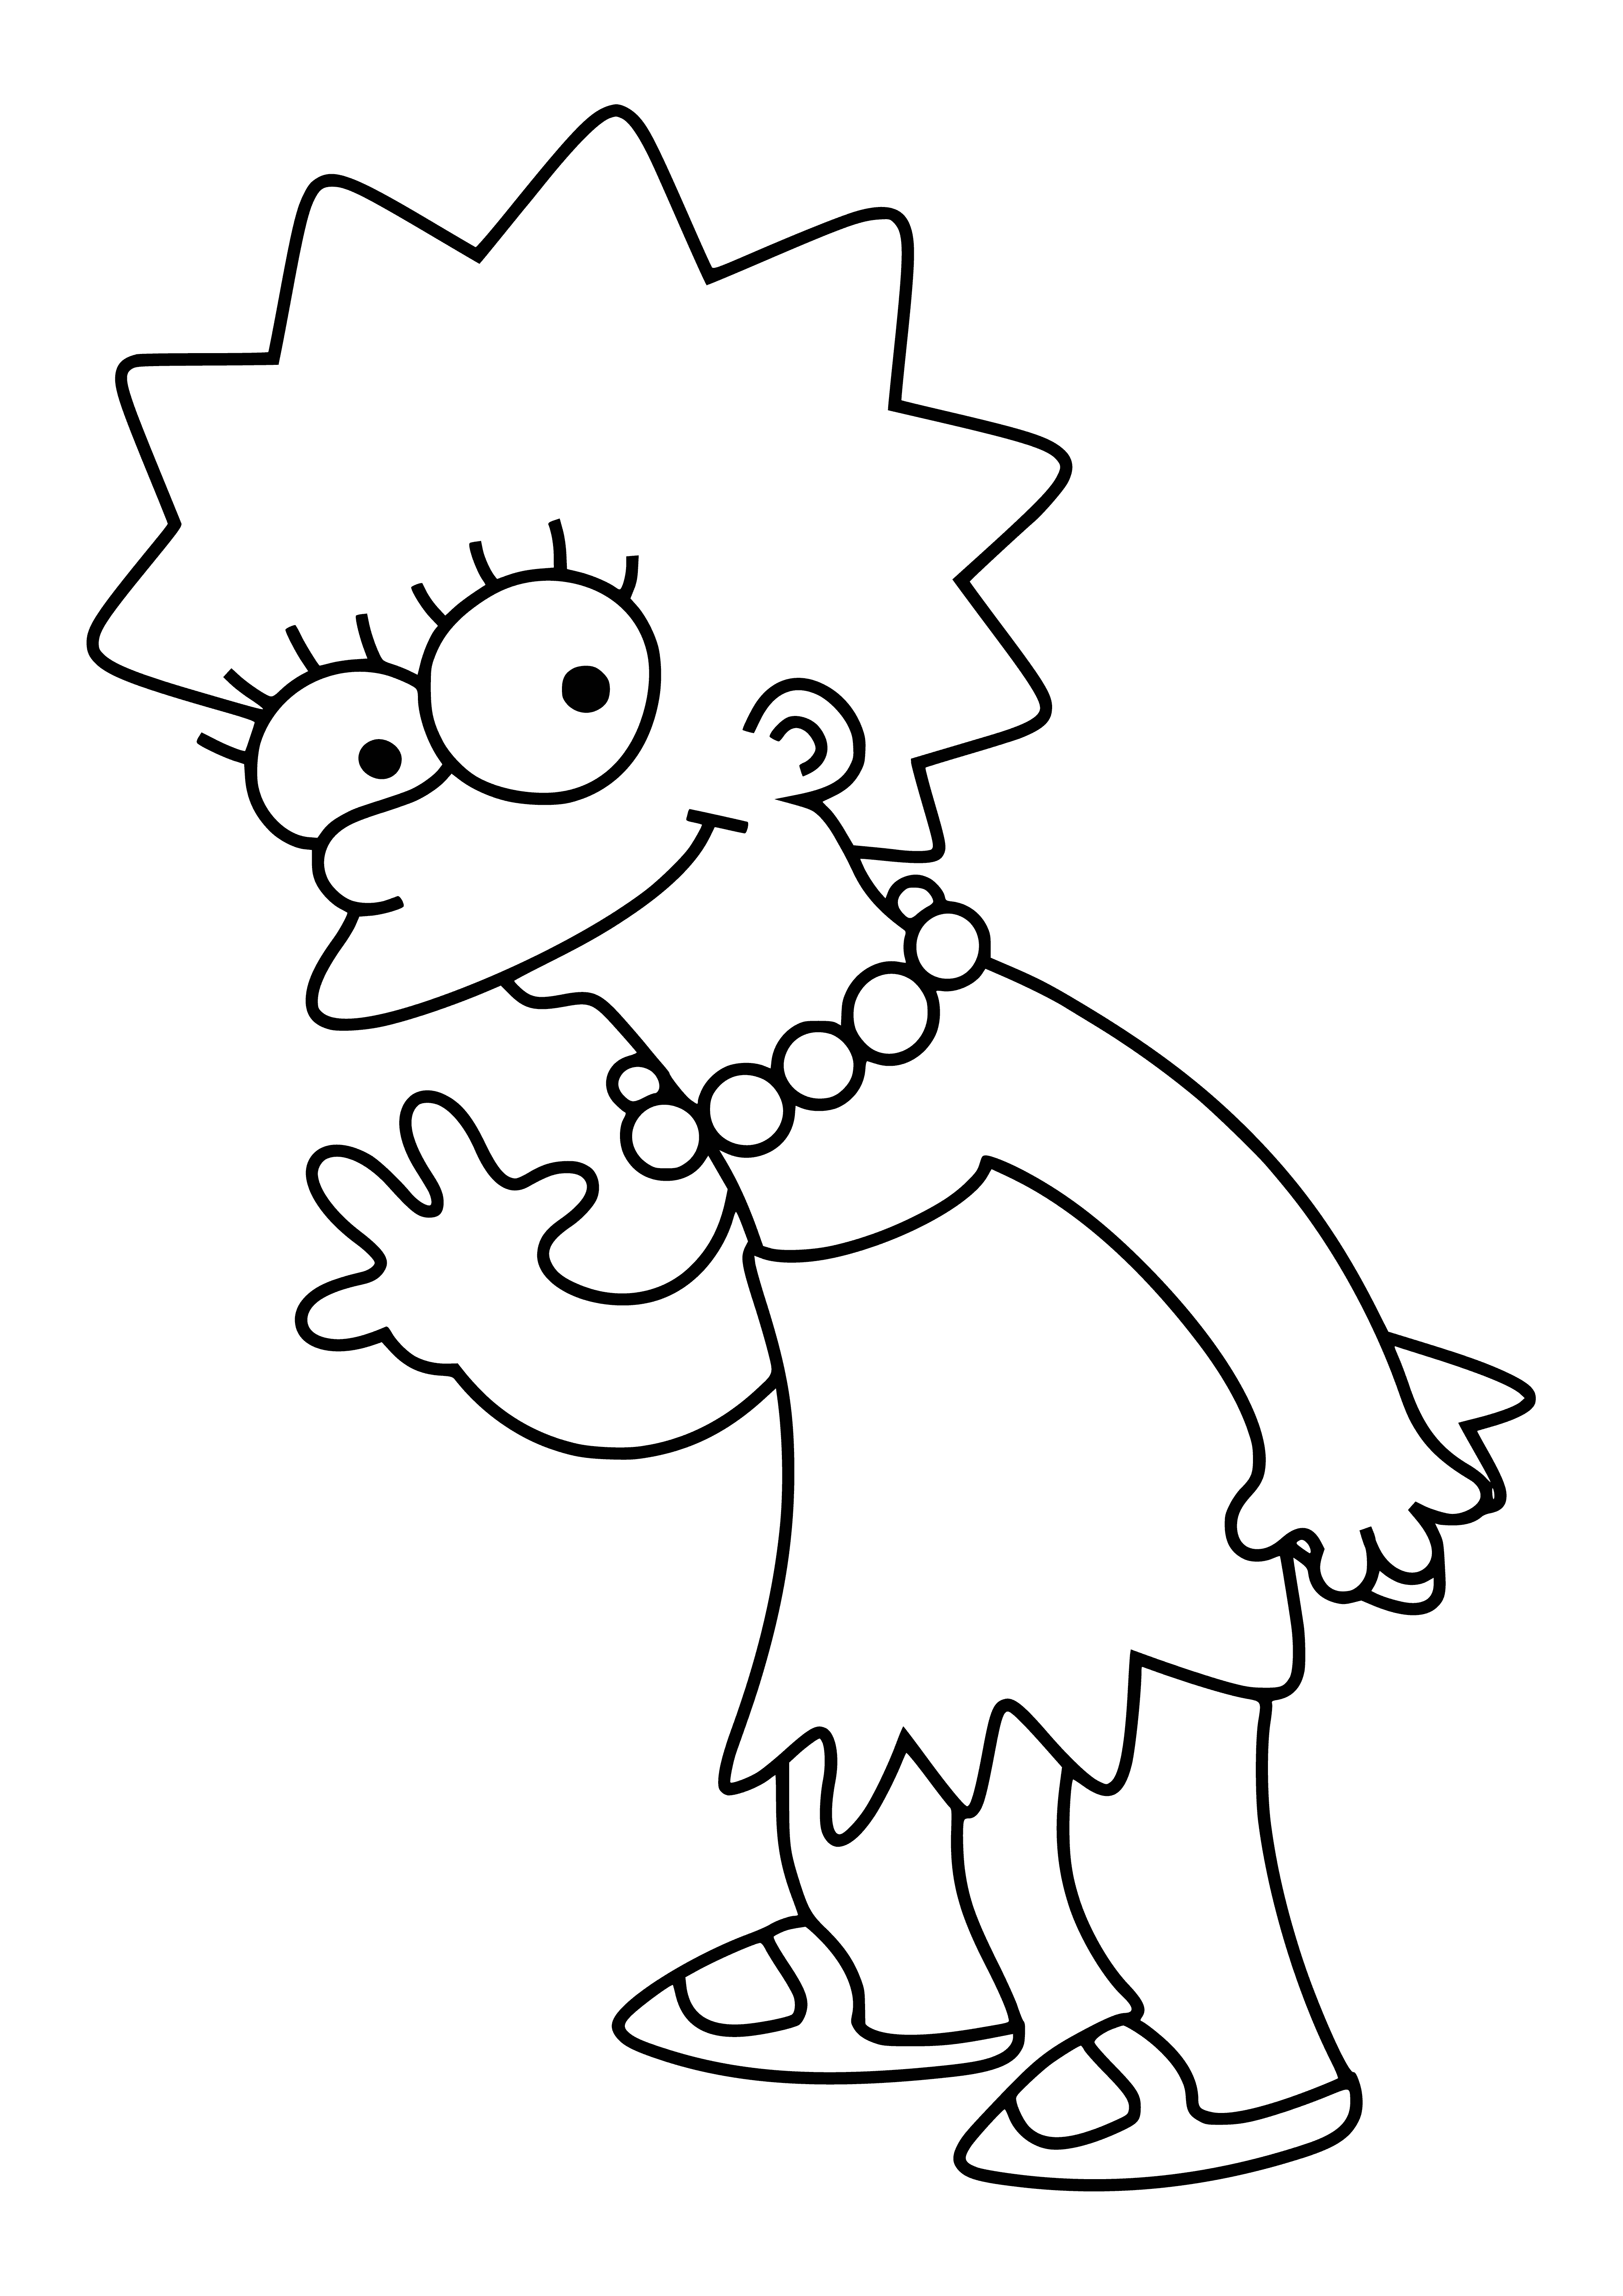 coloring page: 8yo Lisa is intelligent and helpful, plays sax/guitar, is a vegan, and is committed to her interests like school, music, and politics.